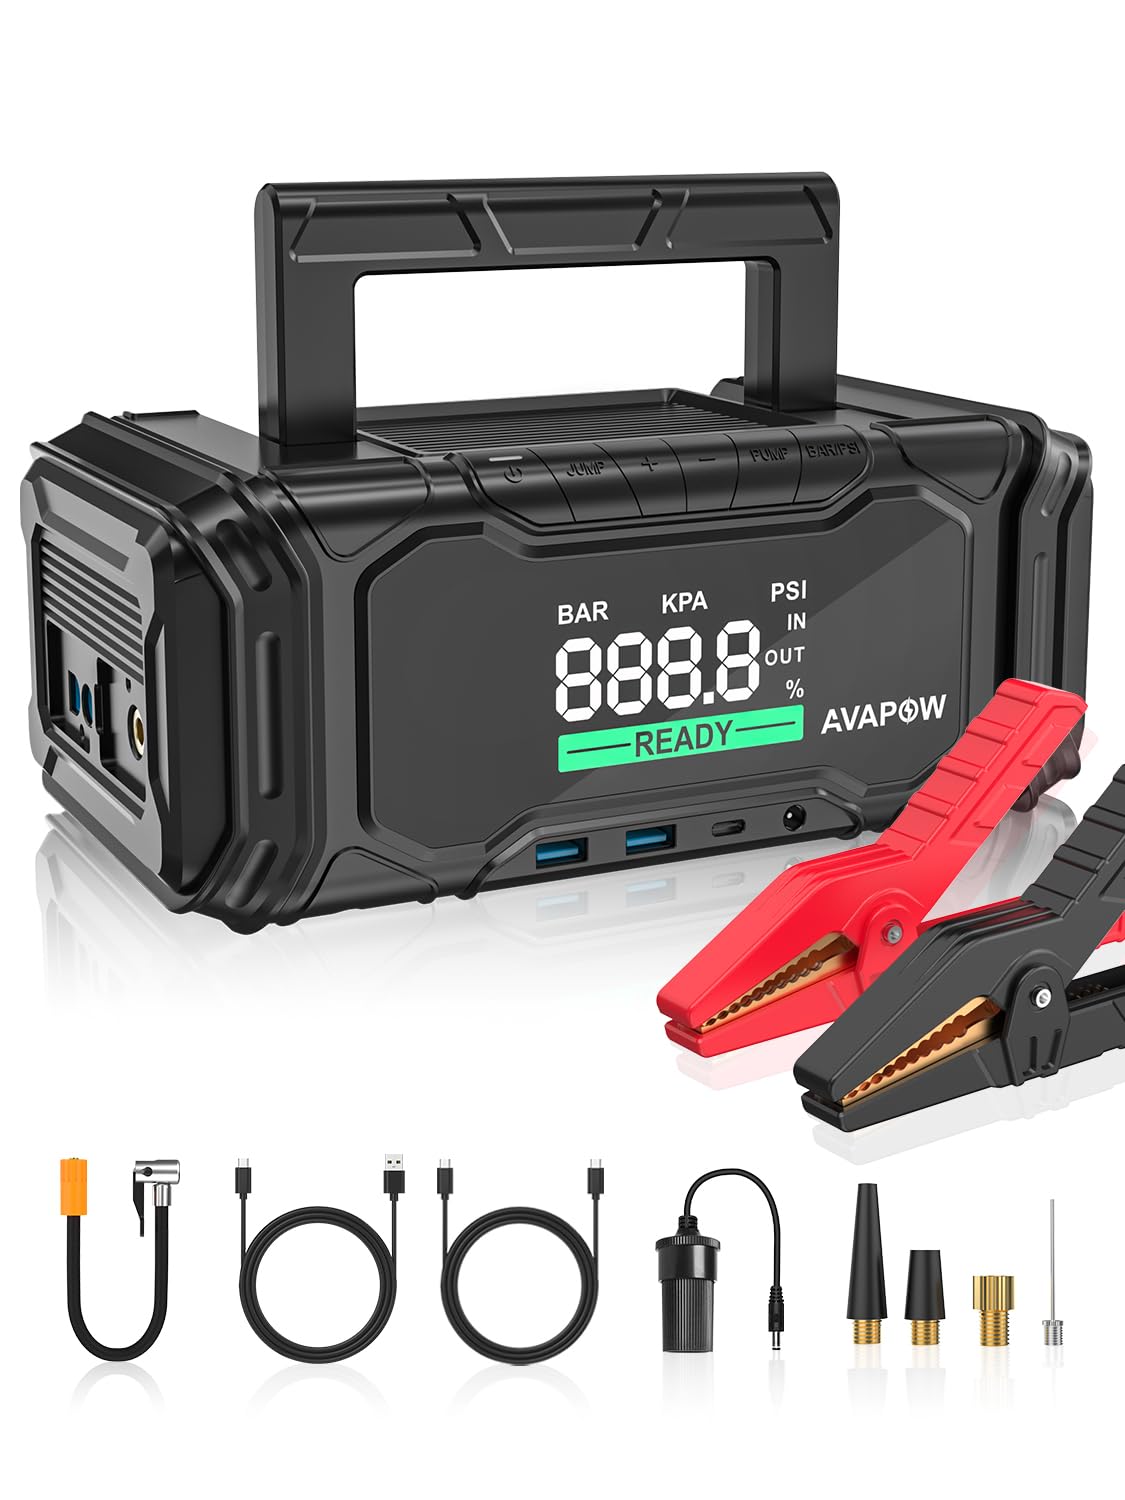 AVAPOW Car Battery Jump Starter 3000A Peak with Air Compressor, 12V 150PSI  Portable Jumpstart with Force Start Function, Portable Starters for Up to